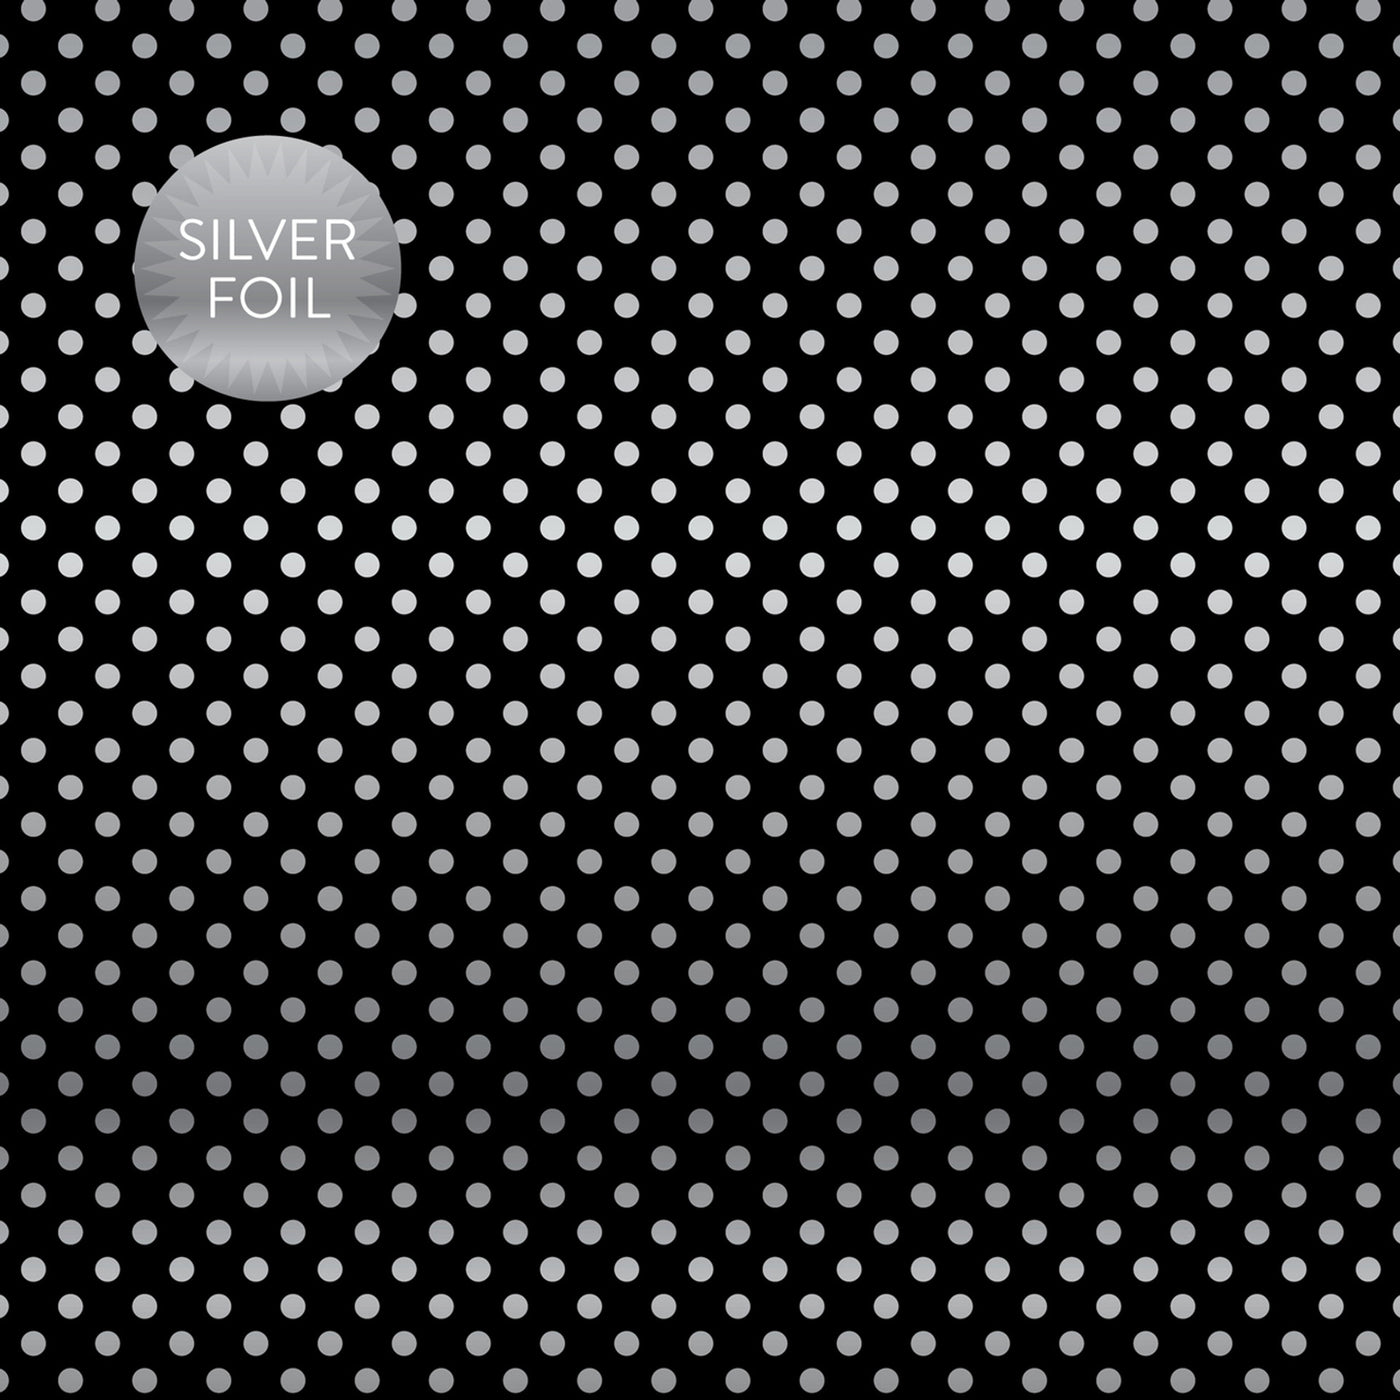 Silver foil dots on black 12x12 cardstock, plain black reverse, from Dots & Stripes Collection by Carta Bella Paper.